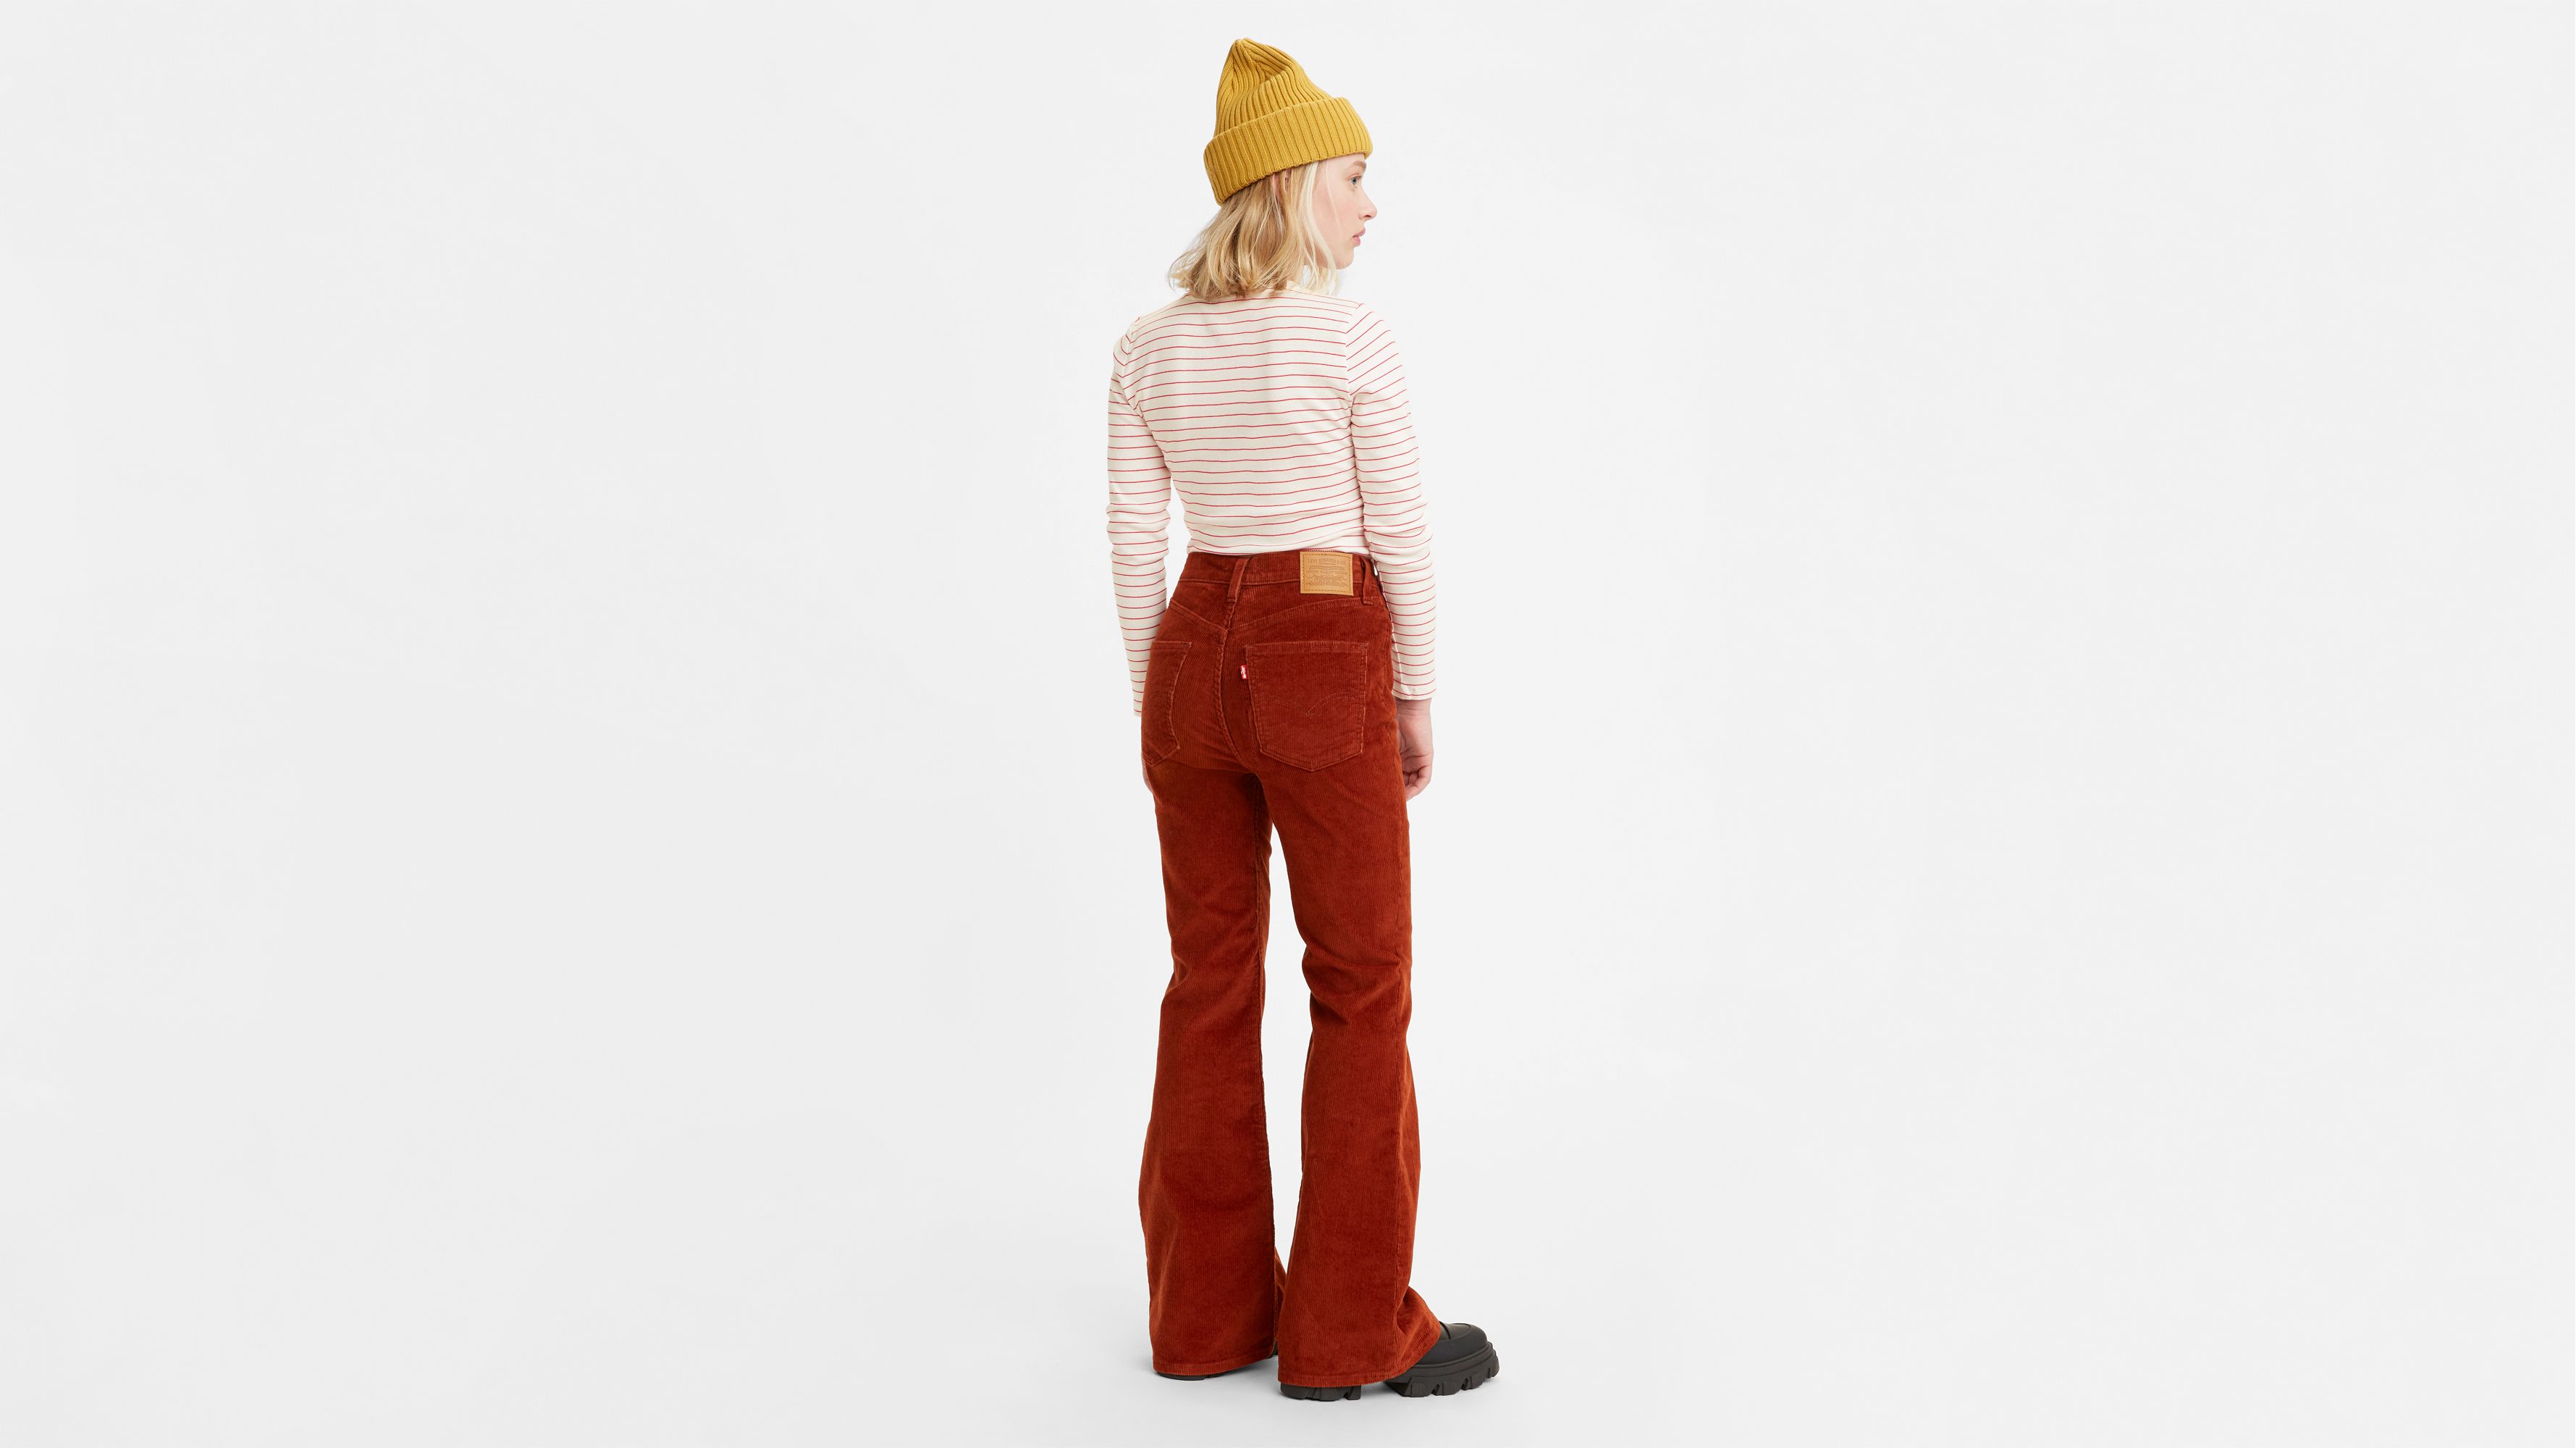 70's High Rise Flare Corduroy Women's Jeans - Red | Levi's® US